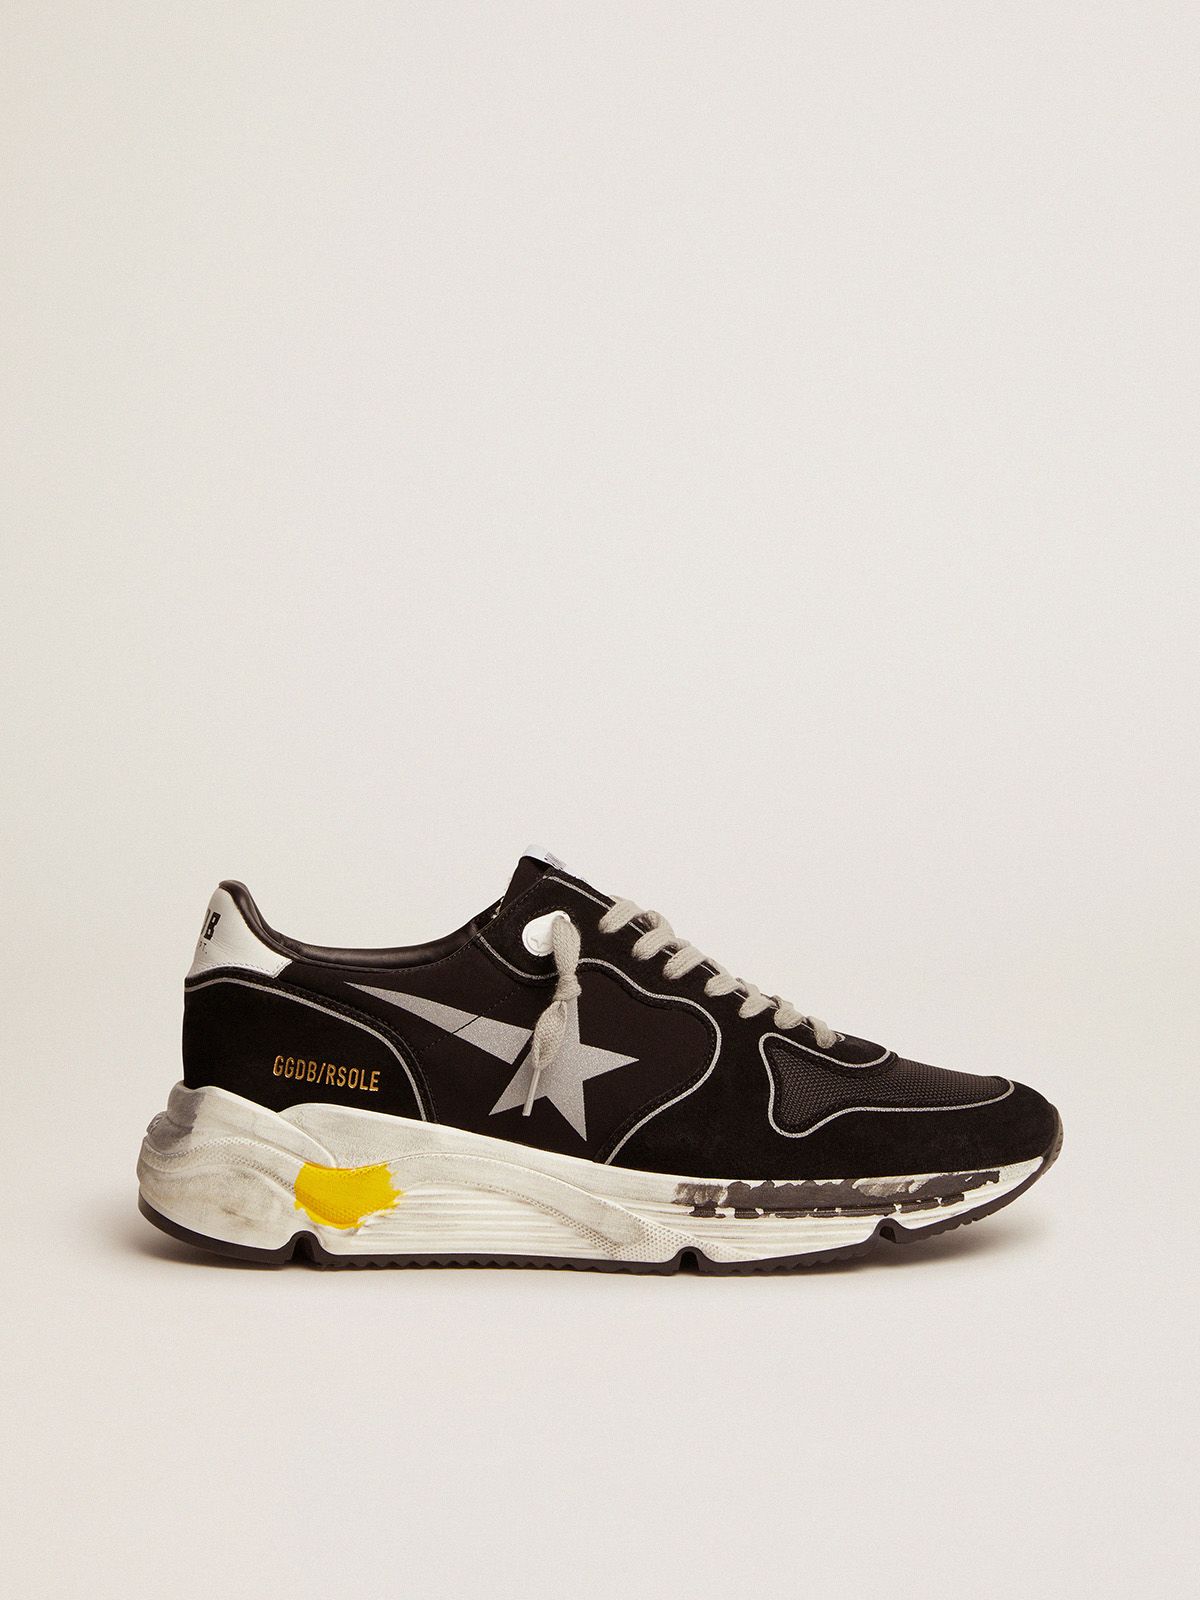 Superstar Ggdb Black Running Sole sneakers with silver star